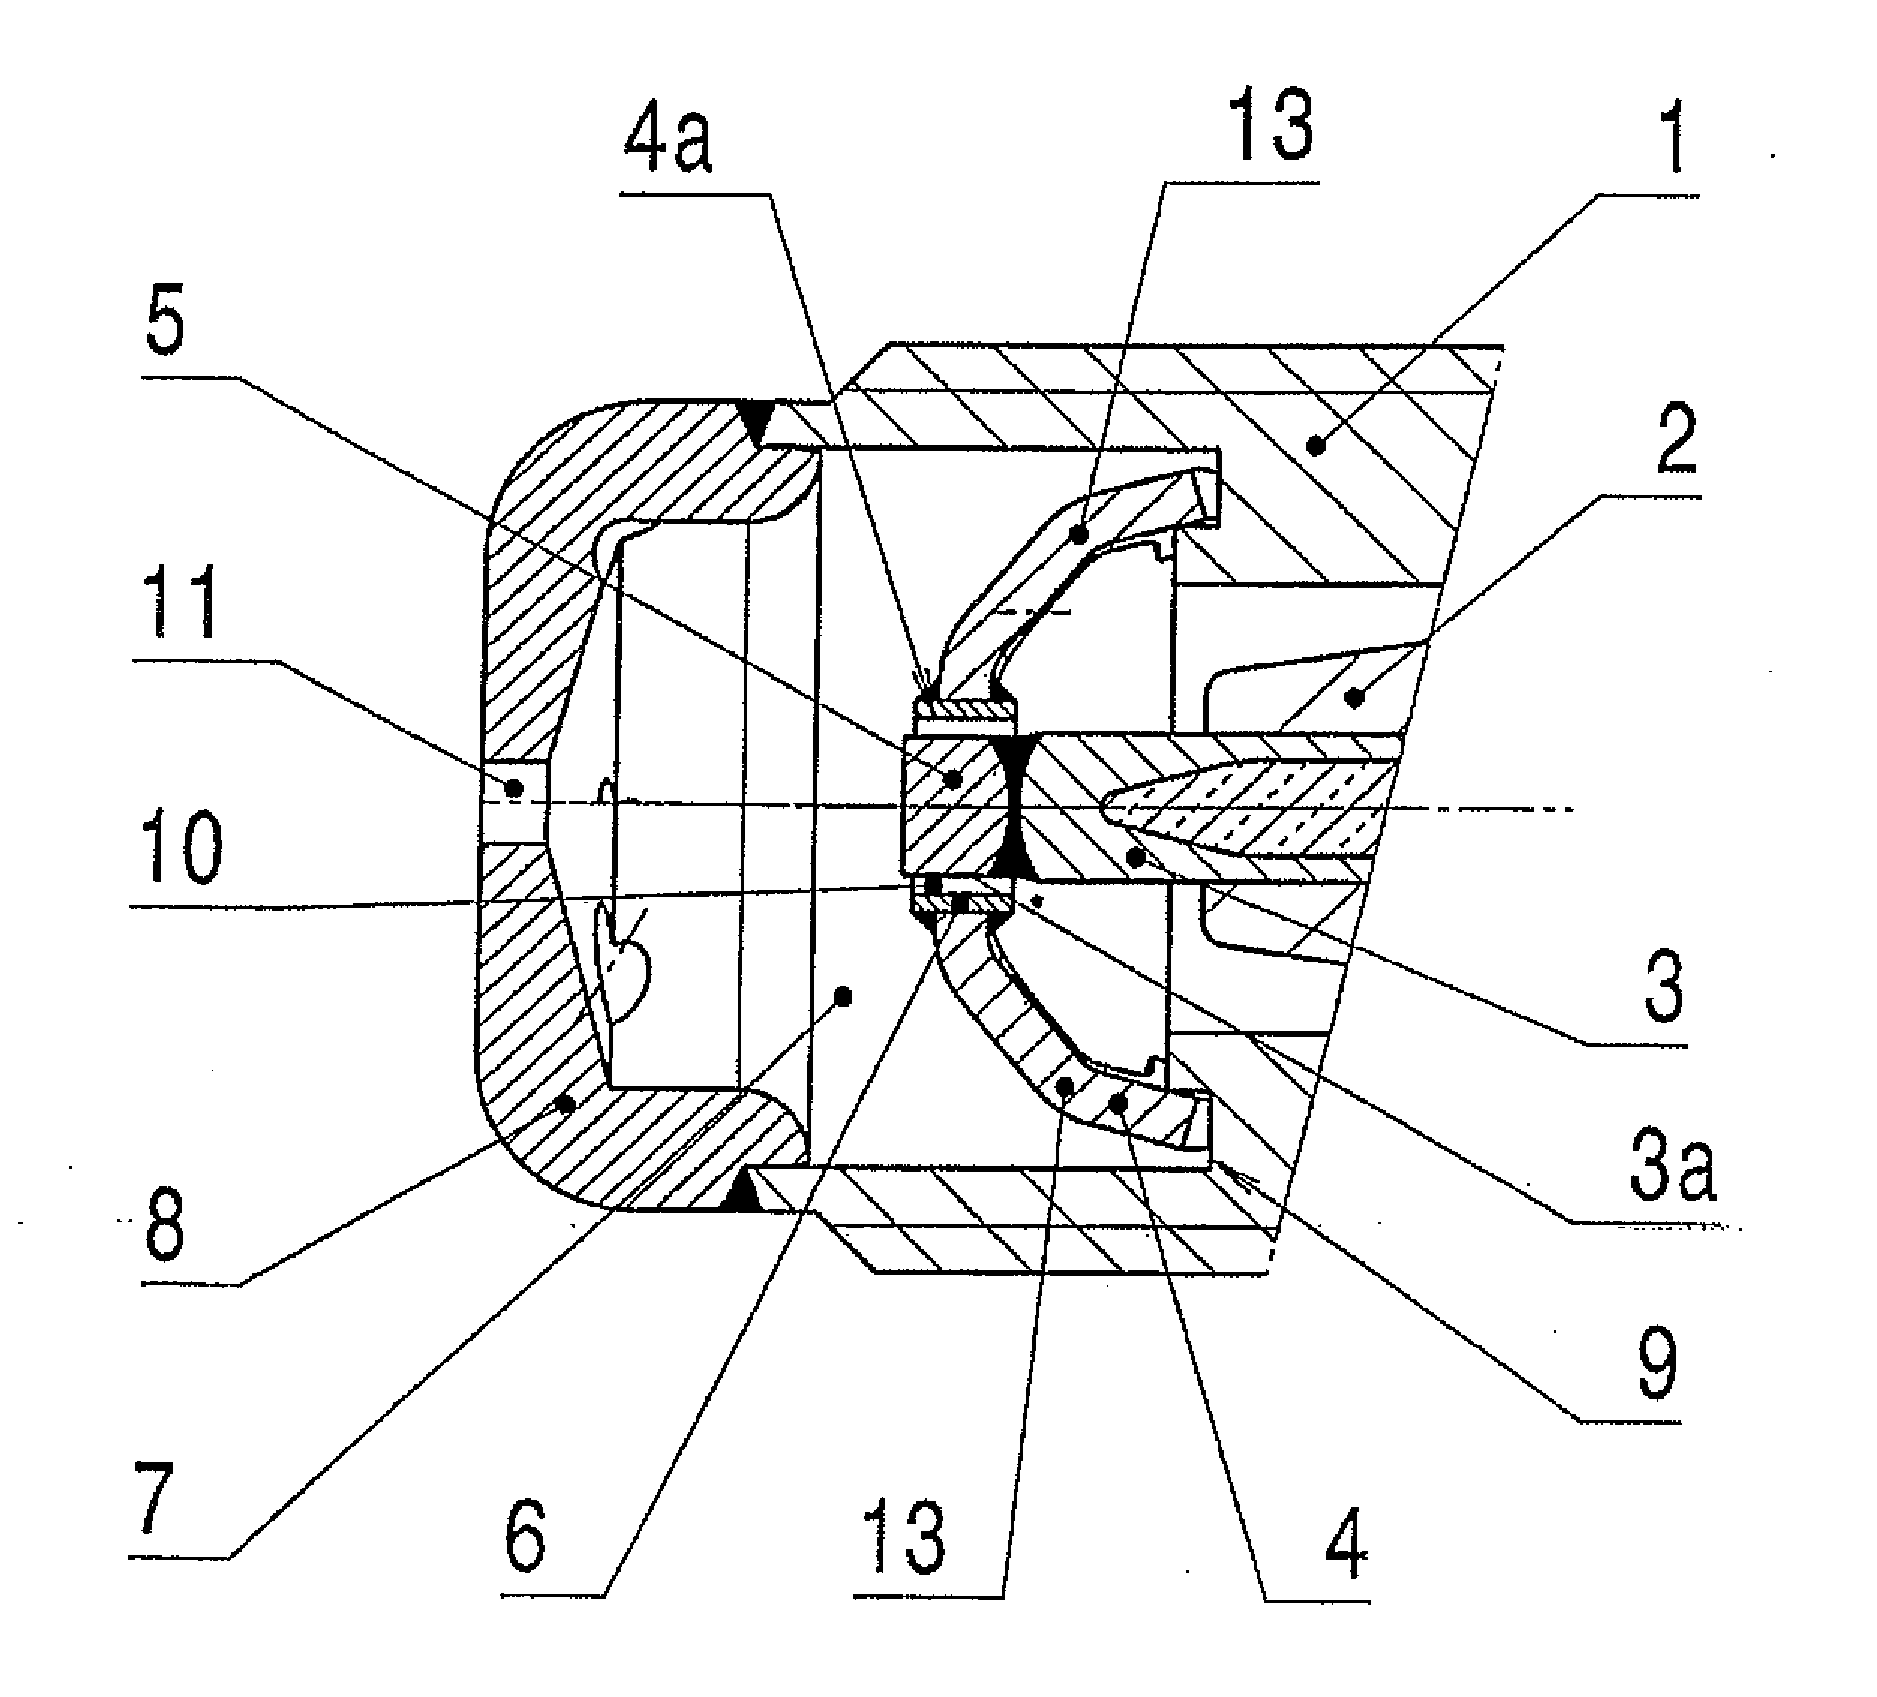 Spark Plug for a Gas-Operated Internal Combustion Engine